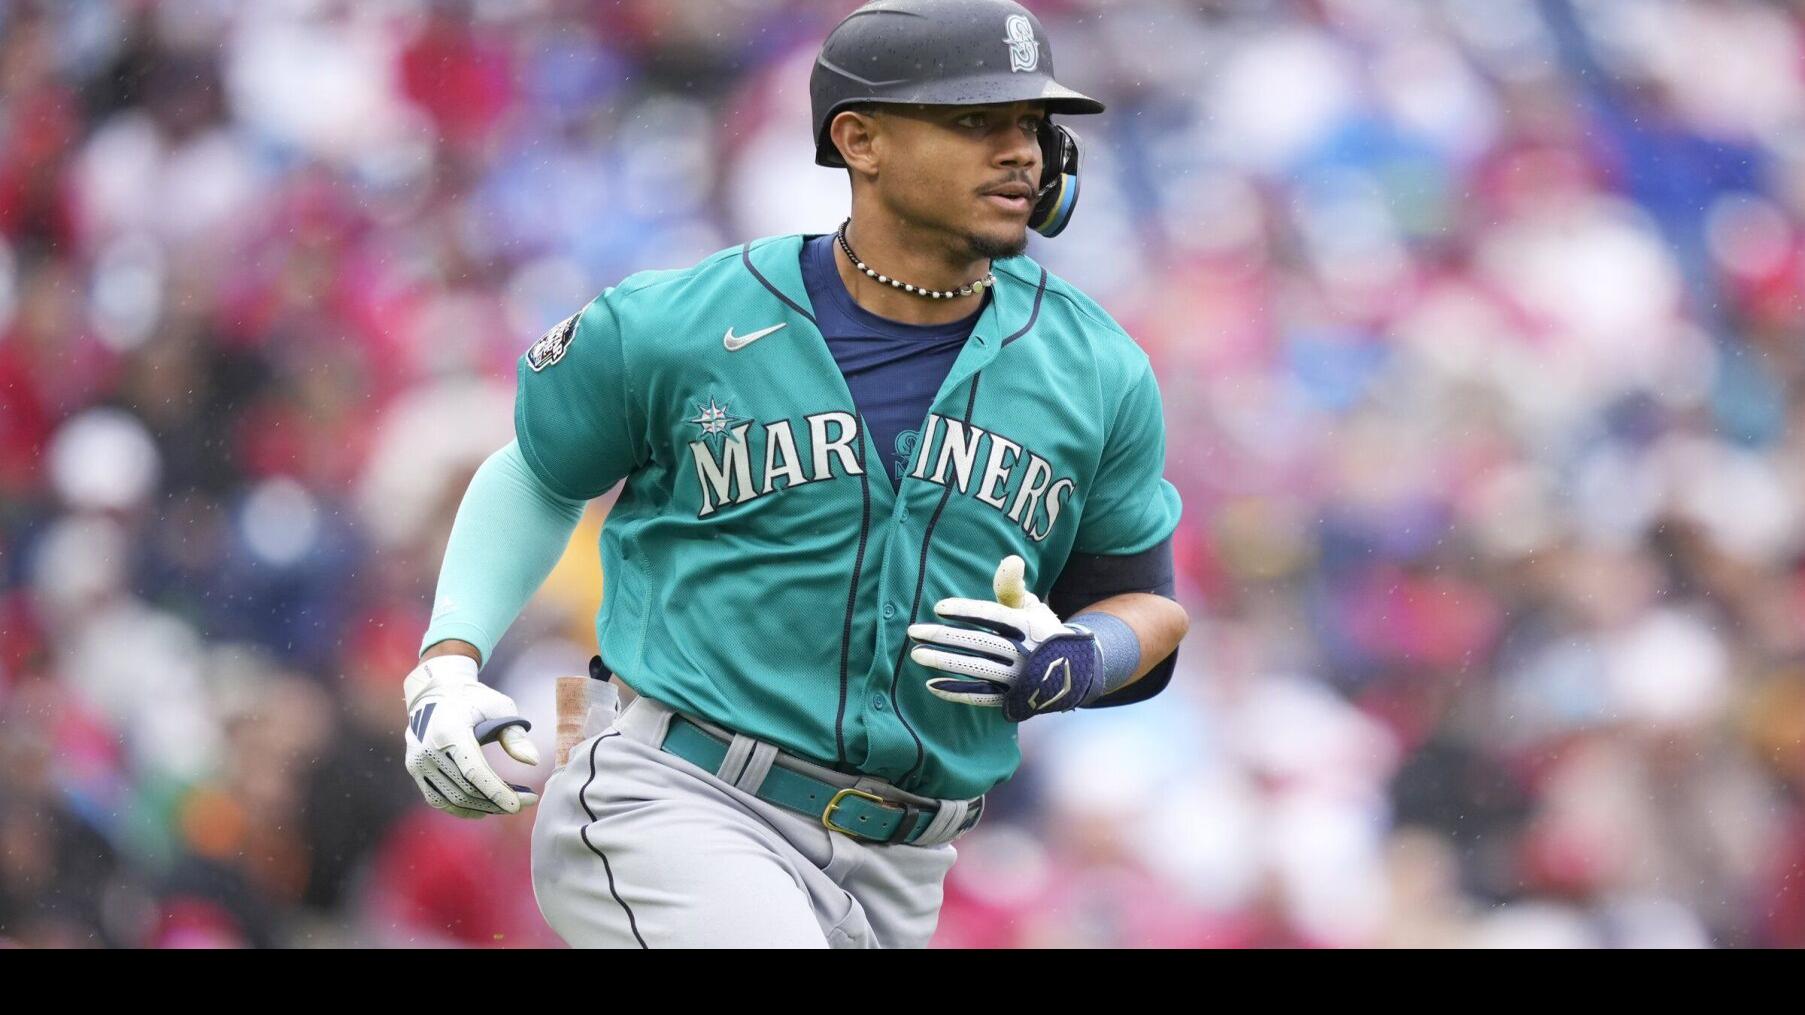 Julio Rodriguez continues to put on a show for the Mariners